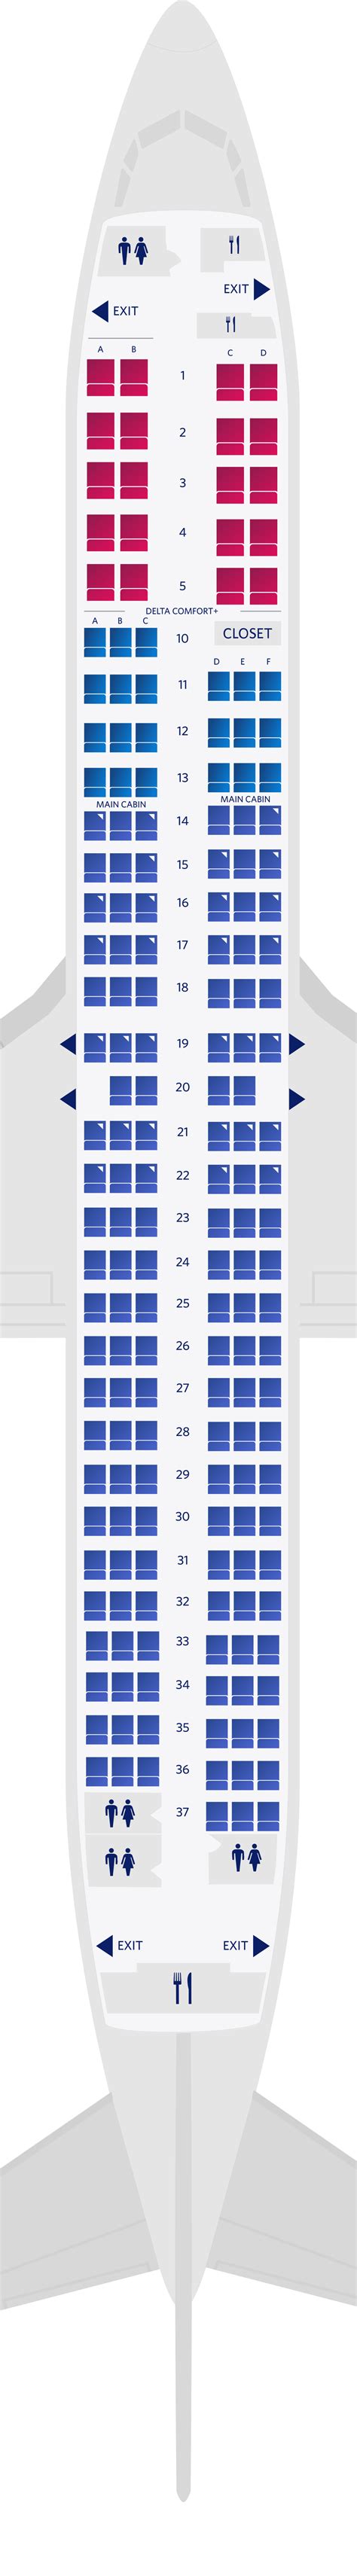 Seat map. Would you like a bird's-eye view of our Boeing 737-800? With our interactive seat map, you can scroll through the airplane and have a look at our seat layout. Find your ideal seat on our Boeing aircraft for the best start to your trip!. 